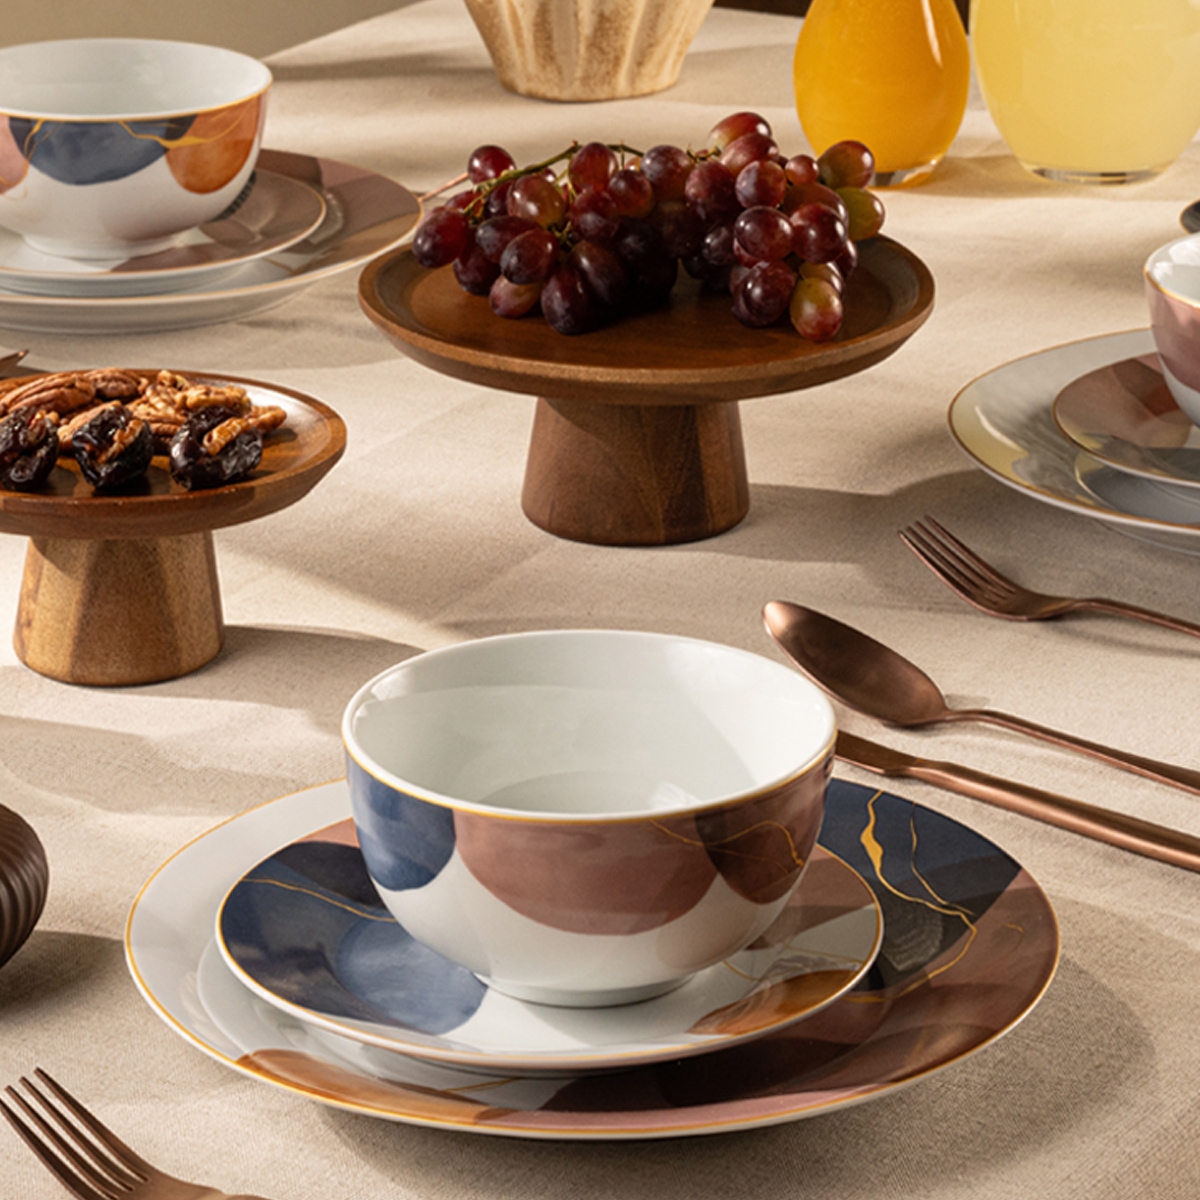 Buy New abstract porcelain dinner set 36pcs in Kuwait